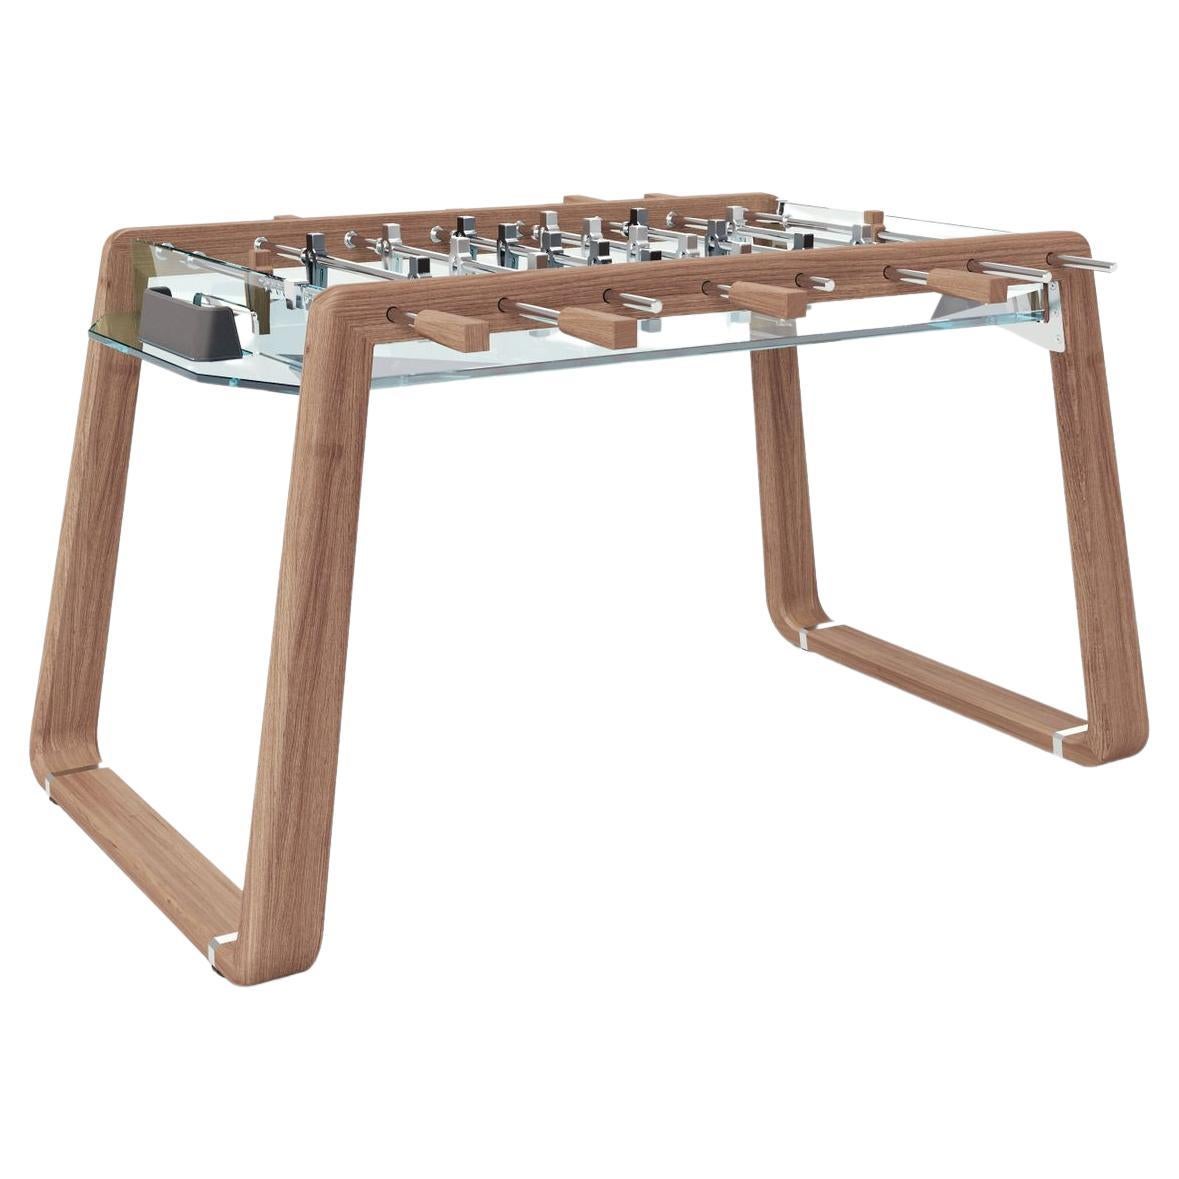 Derby Brown Transparent Glass Beige Leather Foosball Table by Impatia For Sale